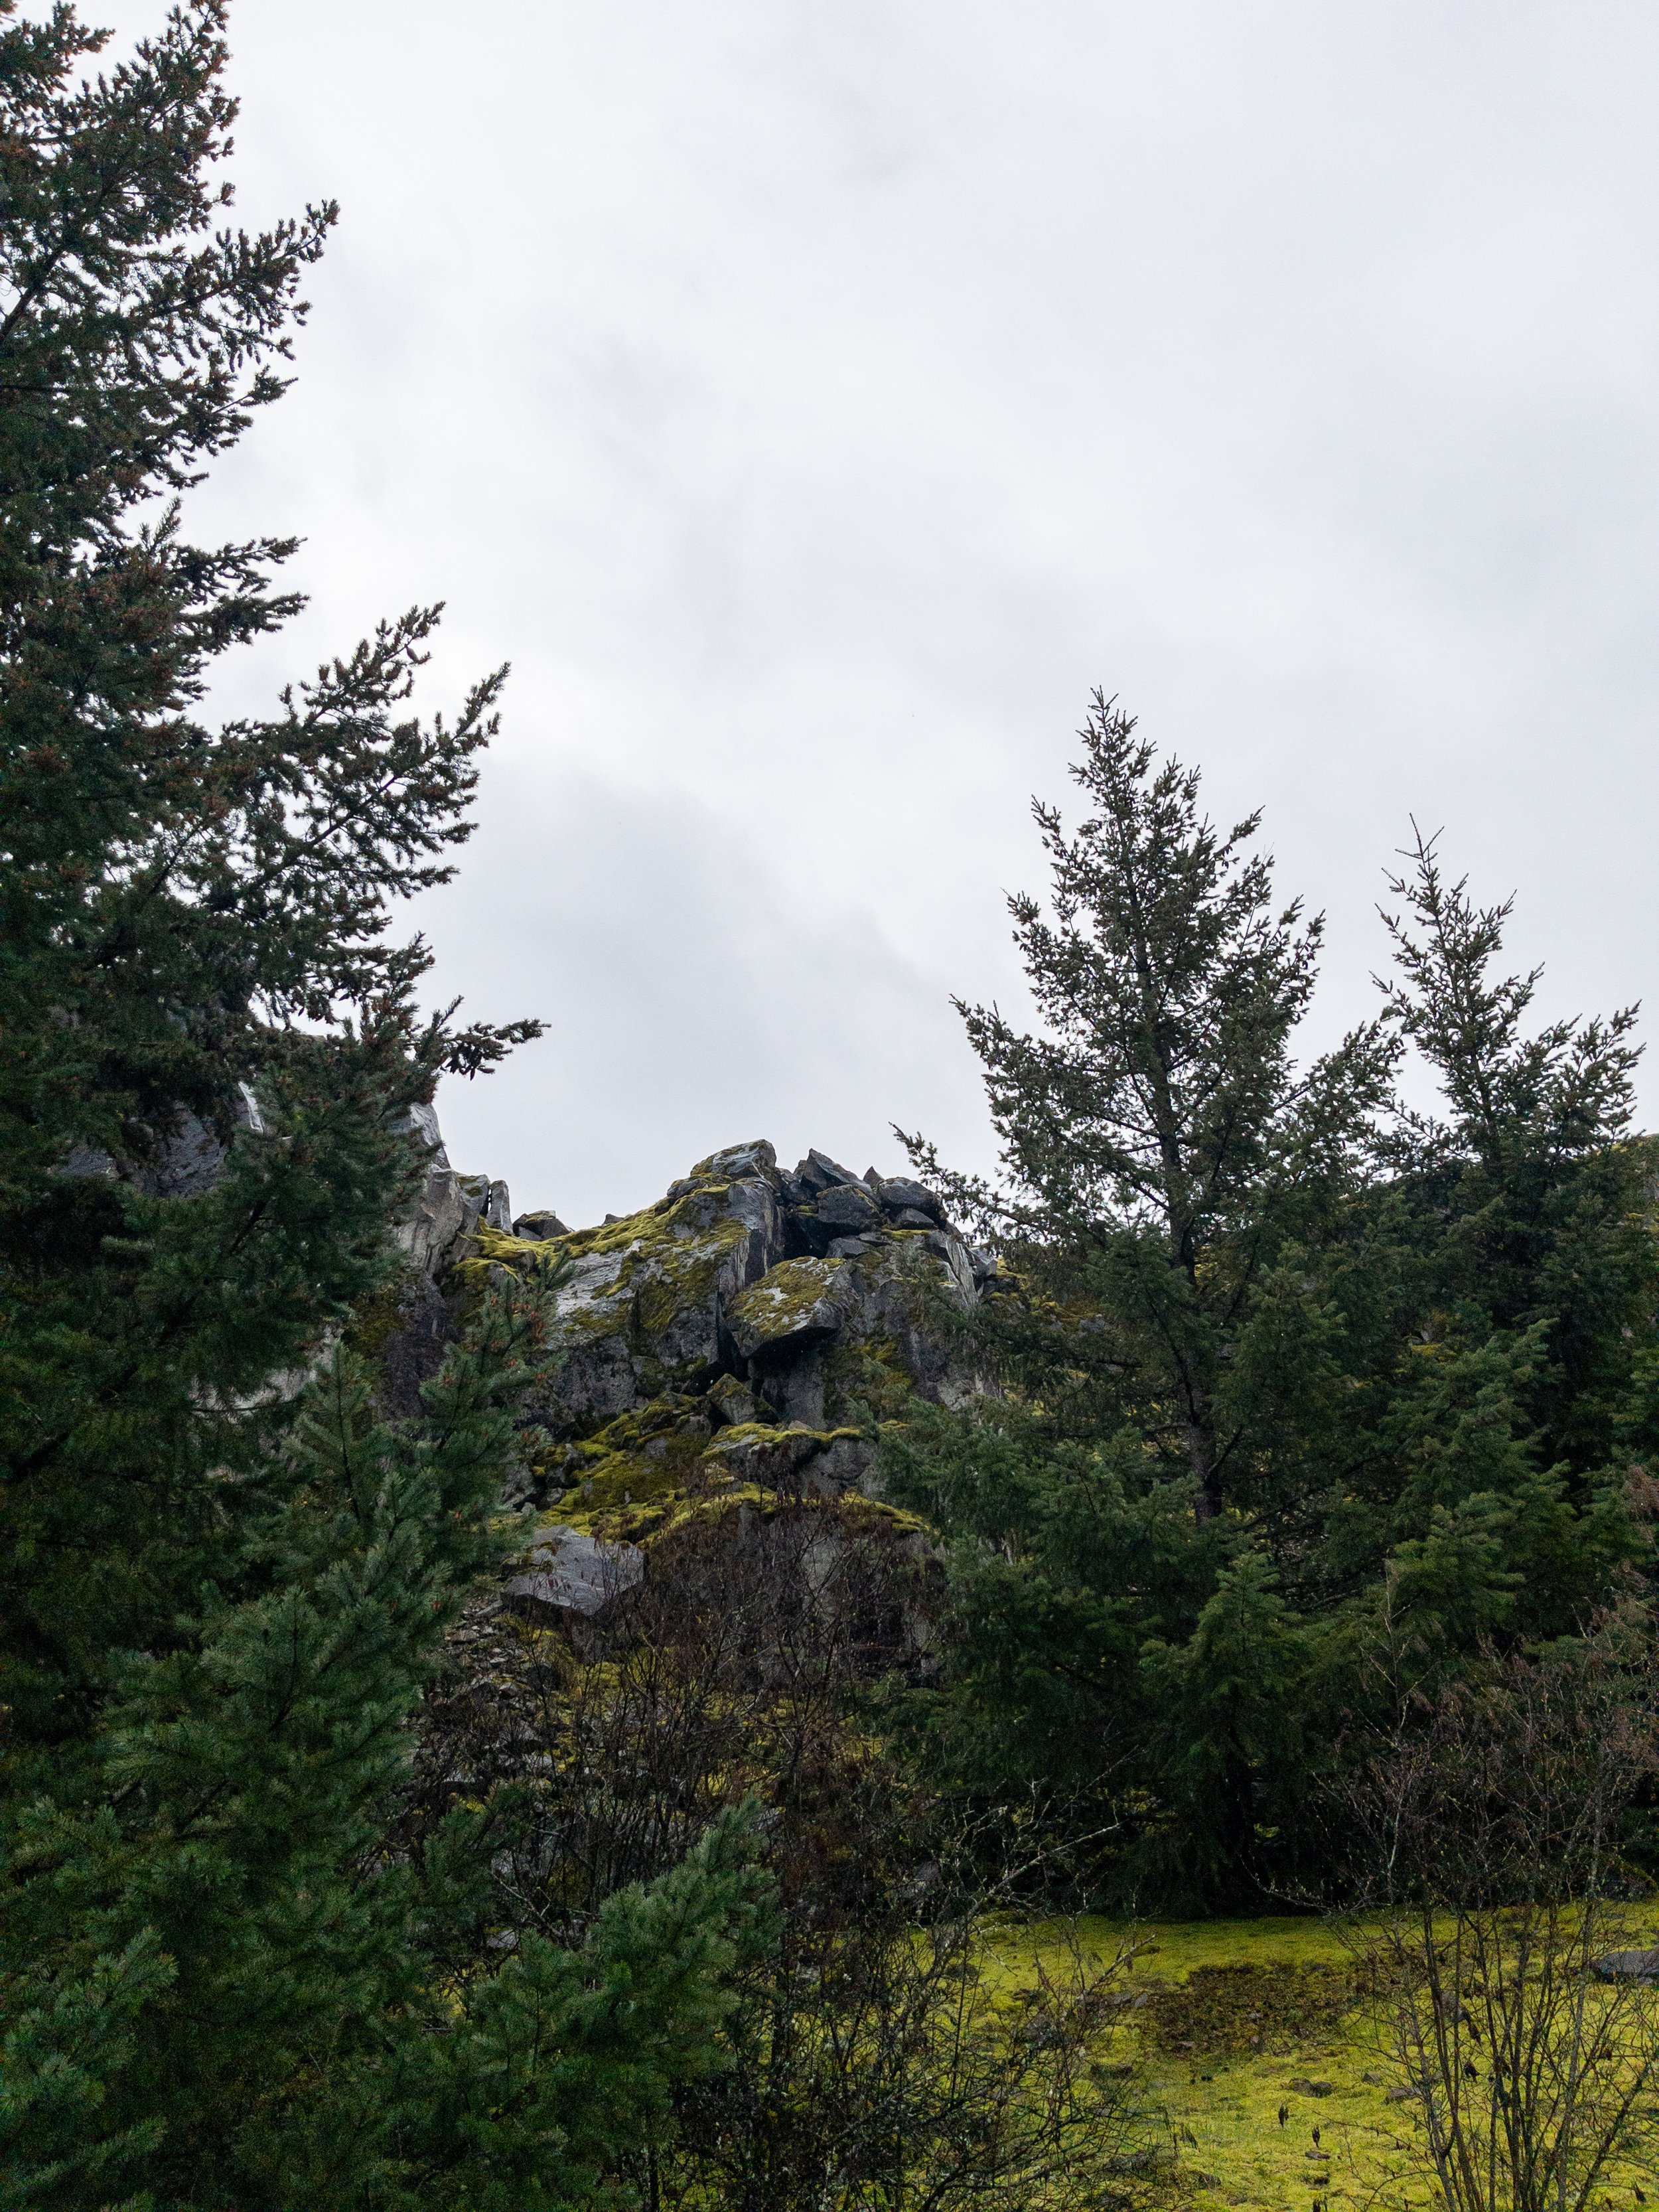 Trees and rocky landscape at Government Cove Peninsula in the Pacific Northwest